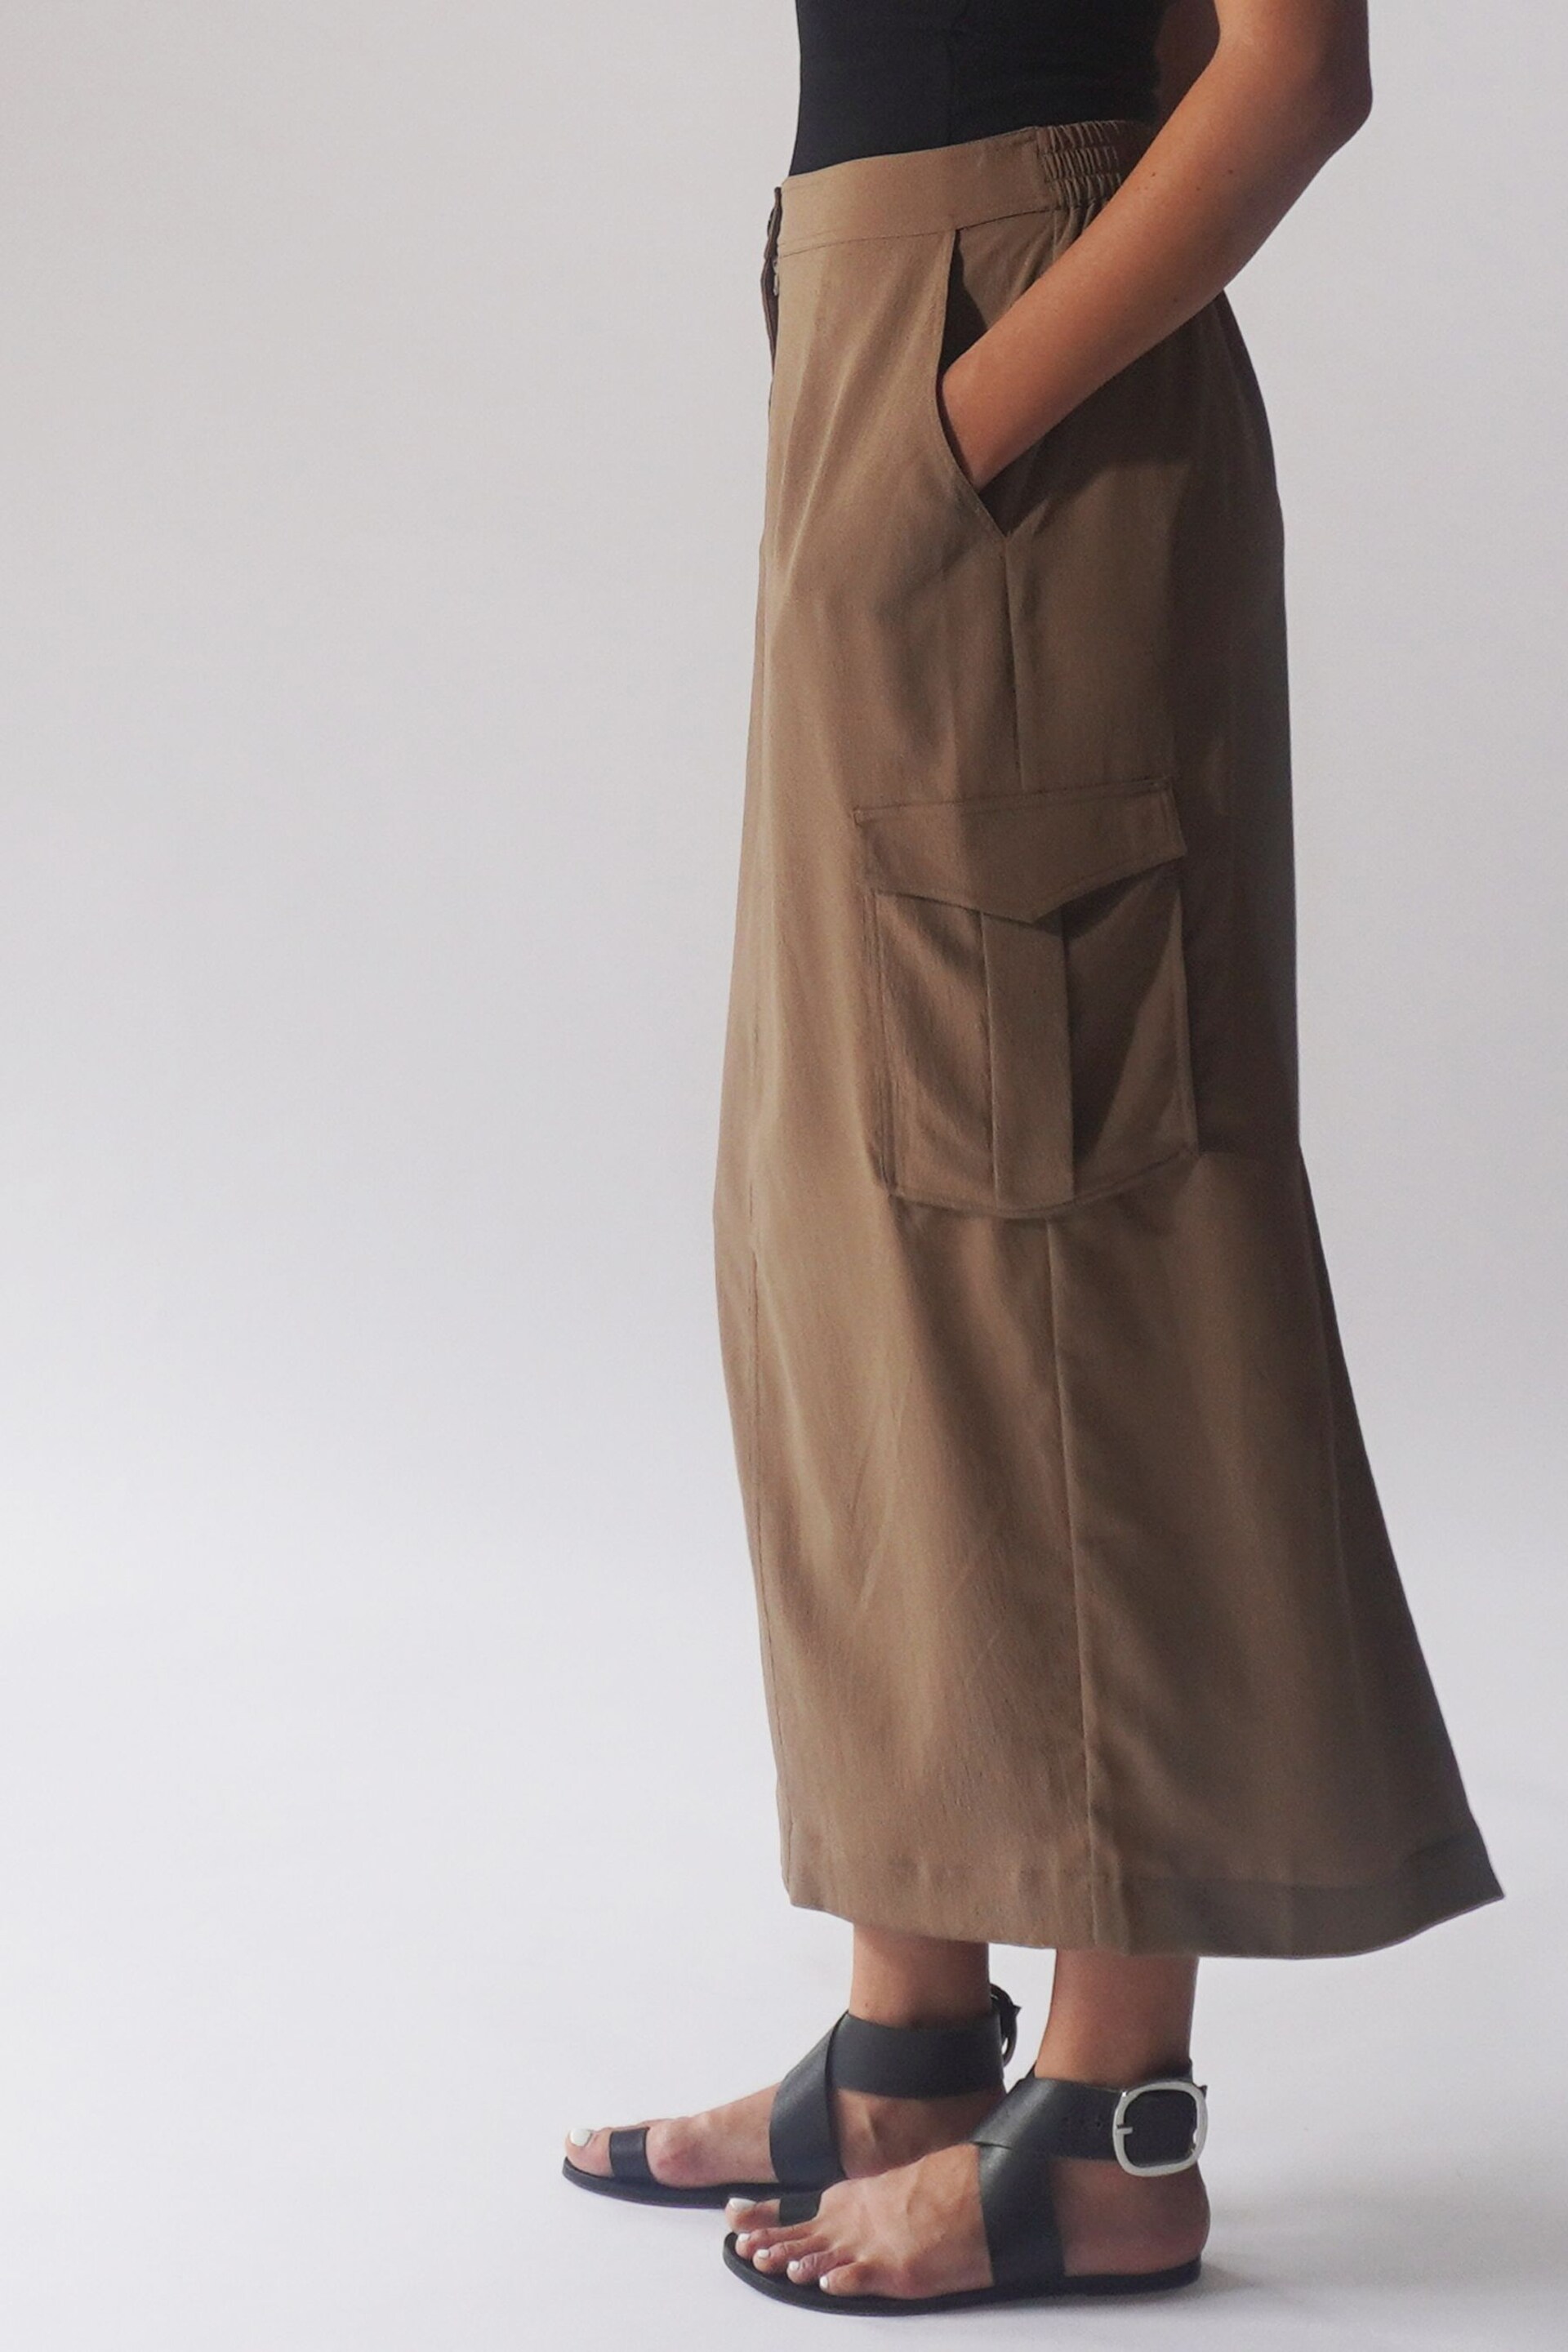 Religion Brown Utility Inspired Maxi Skirt With Patch Pockets - Image 2 of 5